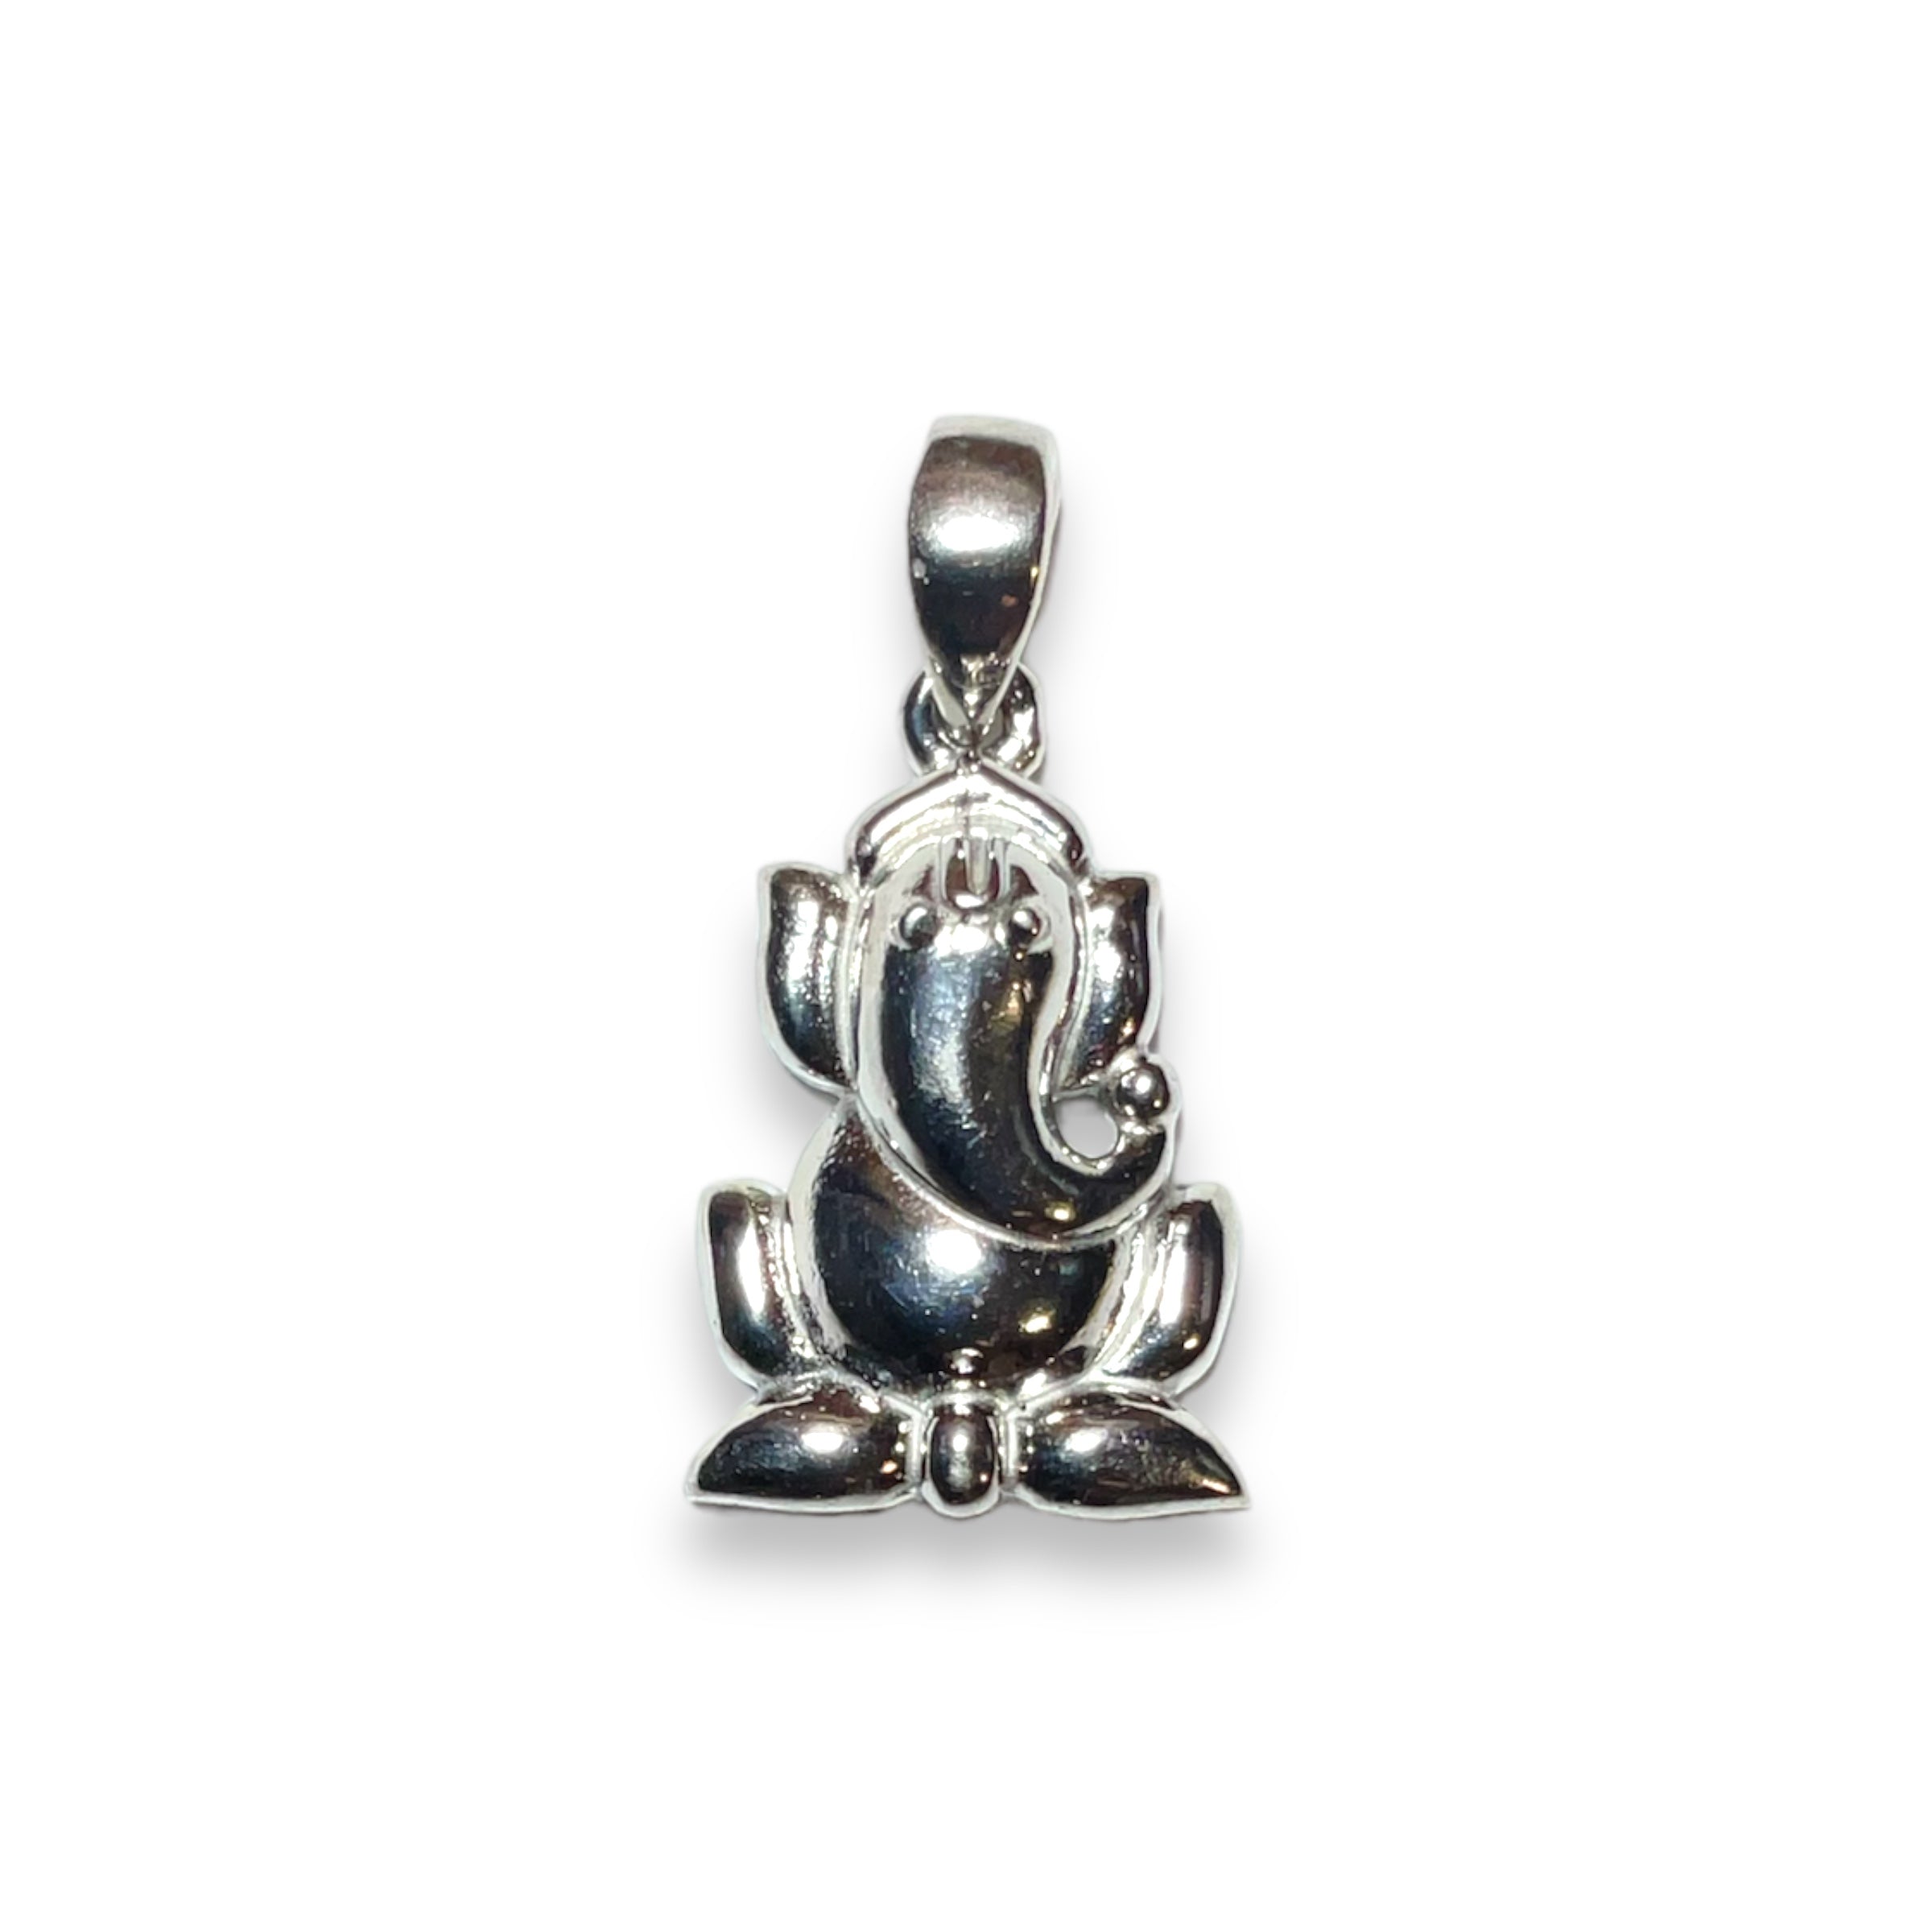 a silver charm with an elephant on it